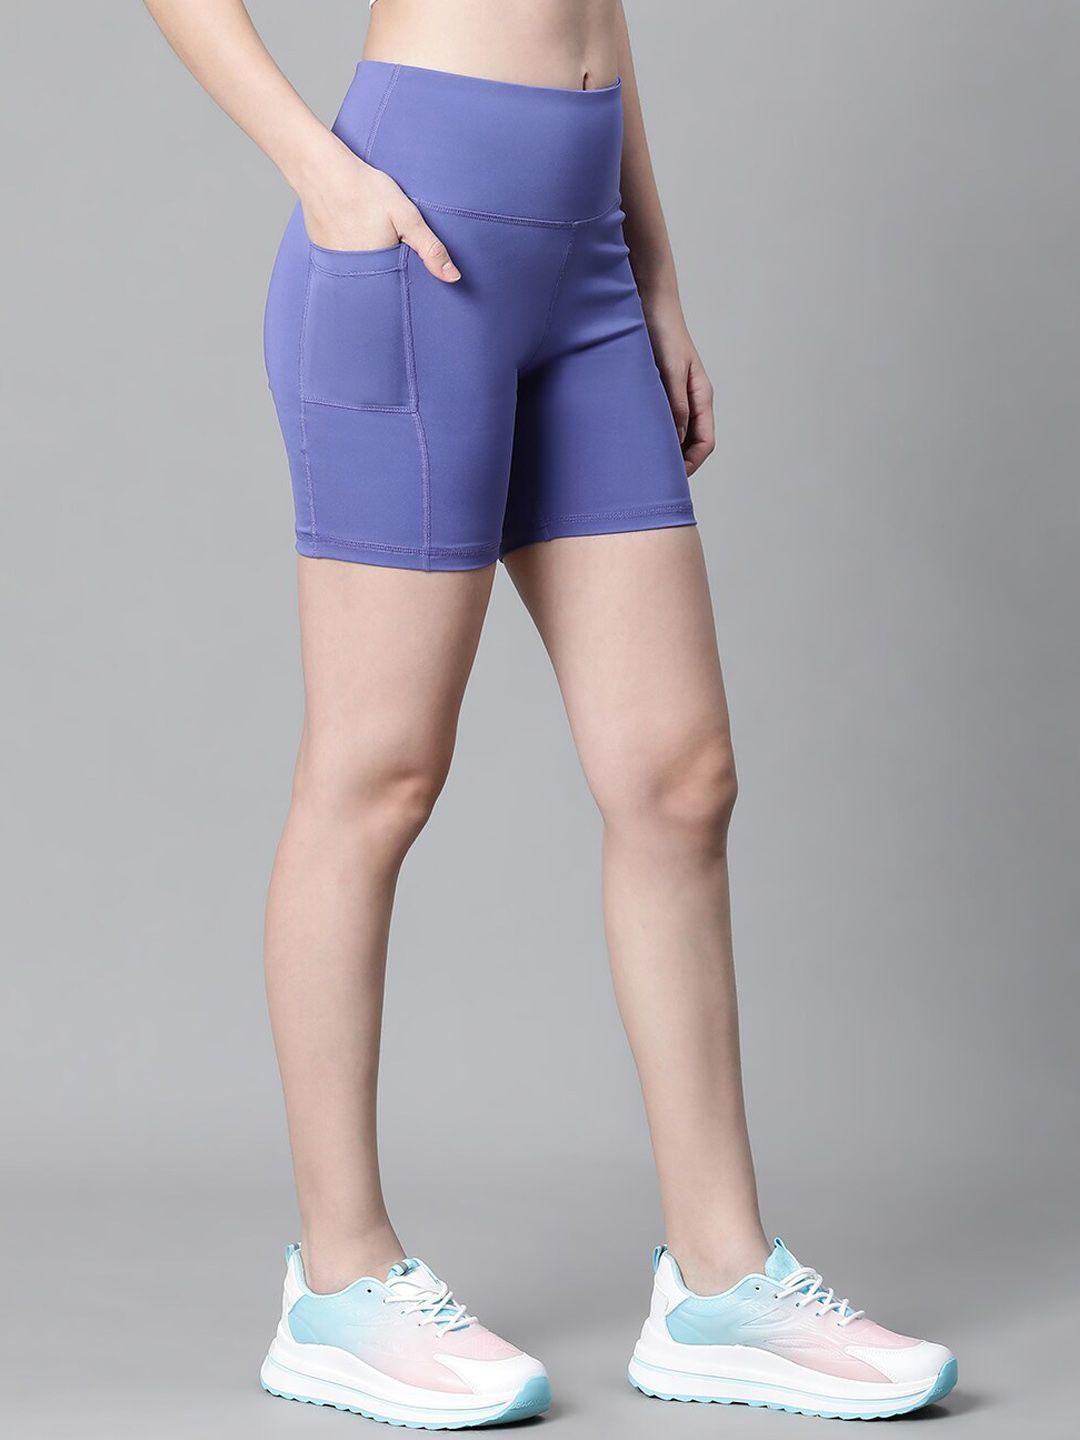 athlisis women blue skinny fit training or gym sports shorts with e-dry technology technology